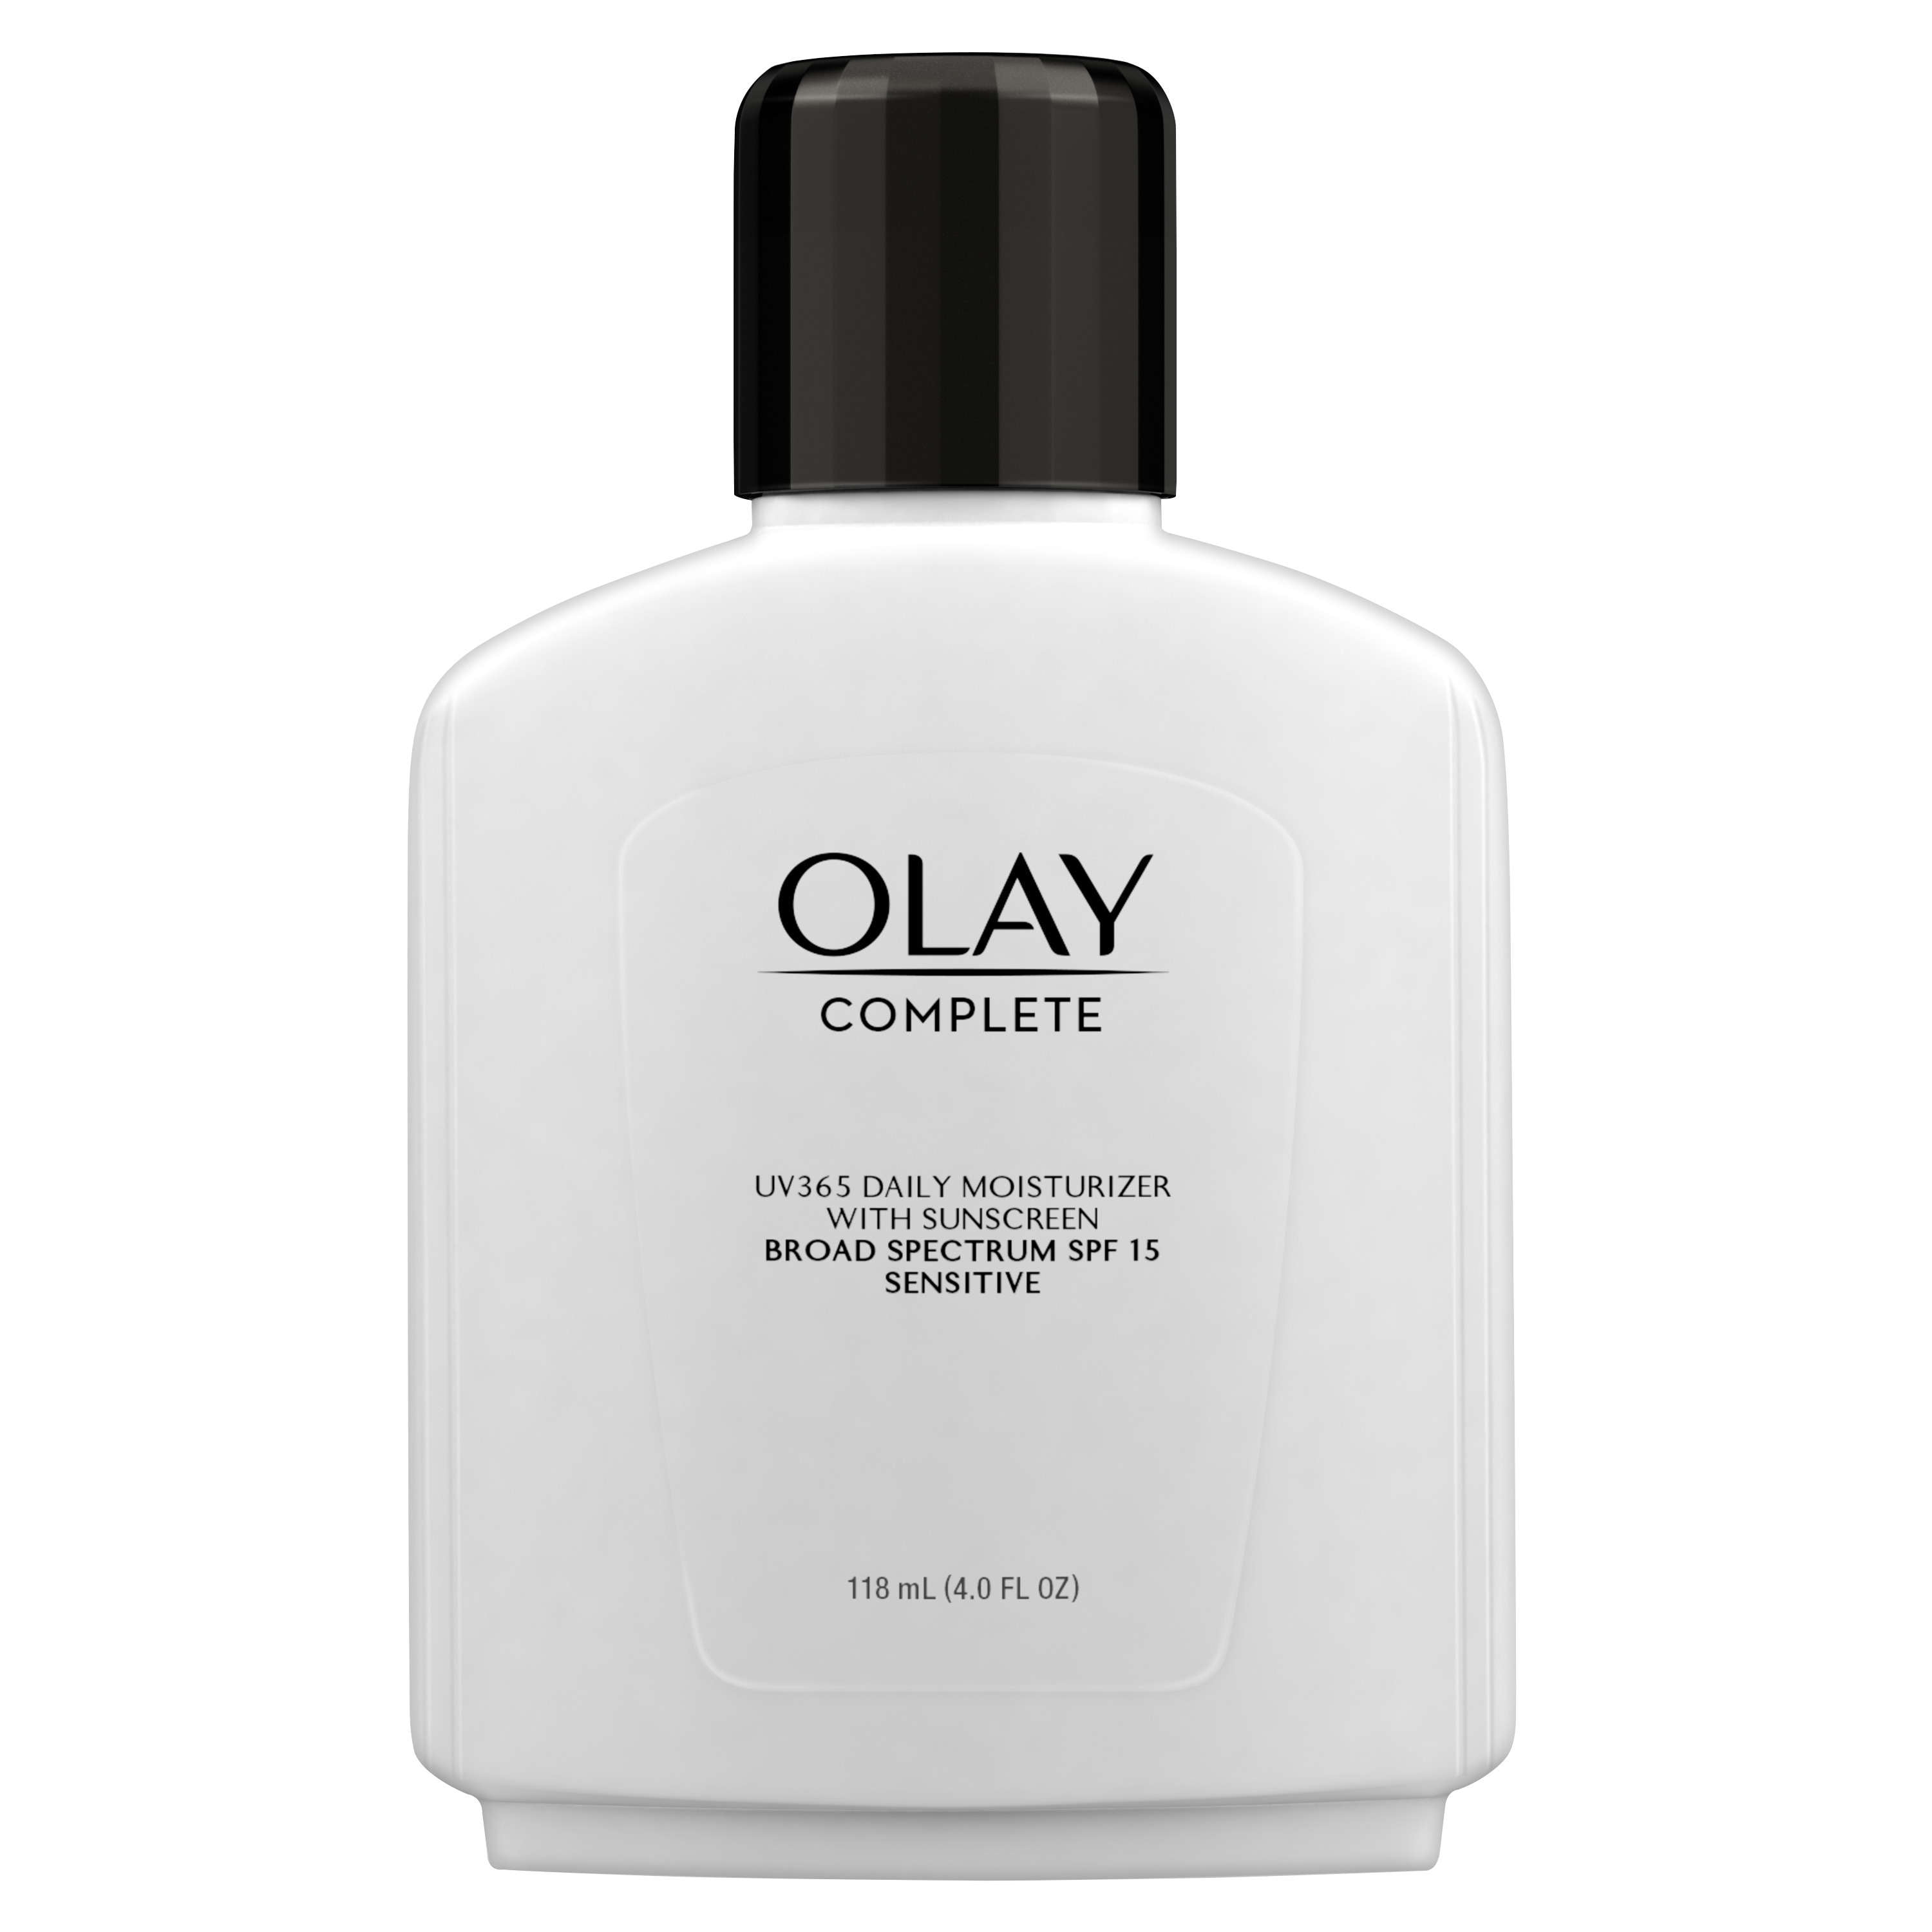 Olay Complete Lotion Face Moisturizer with SPF 15 Sensitive, 4.0 oz